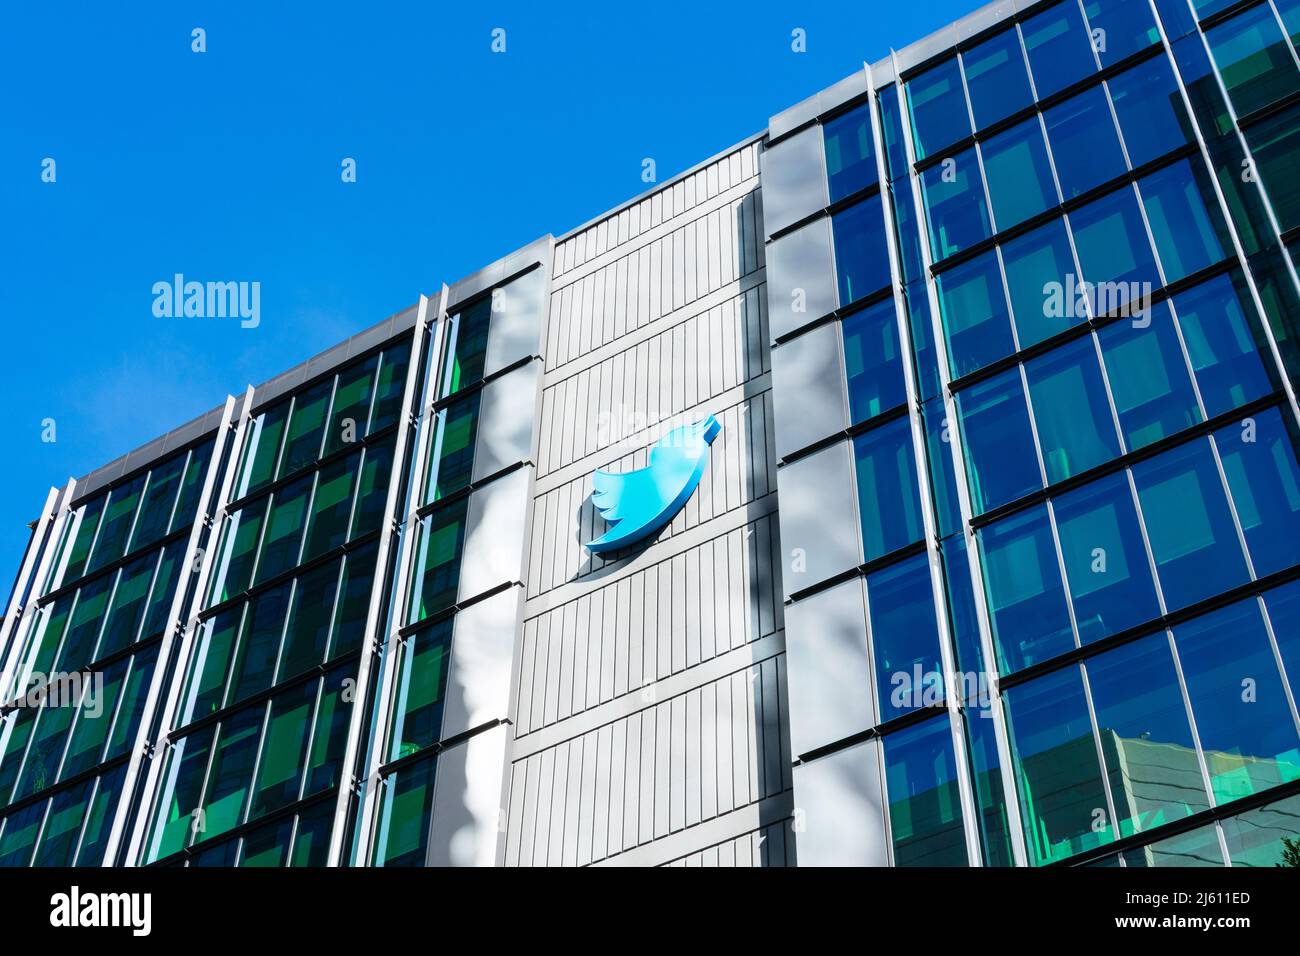 Twitter headquarters campus in downtown San Francisco. Twitter is an American microblogging and social networking service. - San Francisco, California Stock Photo